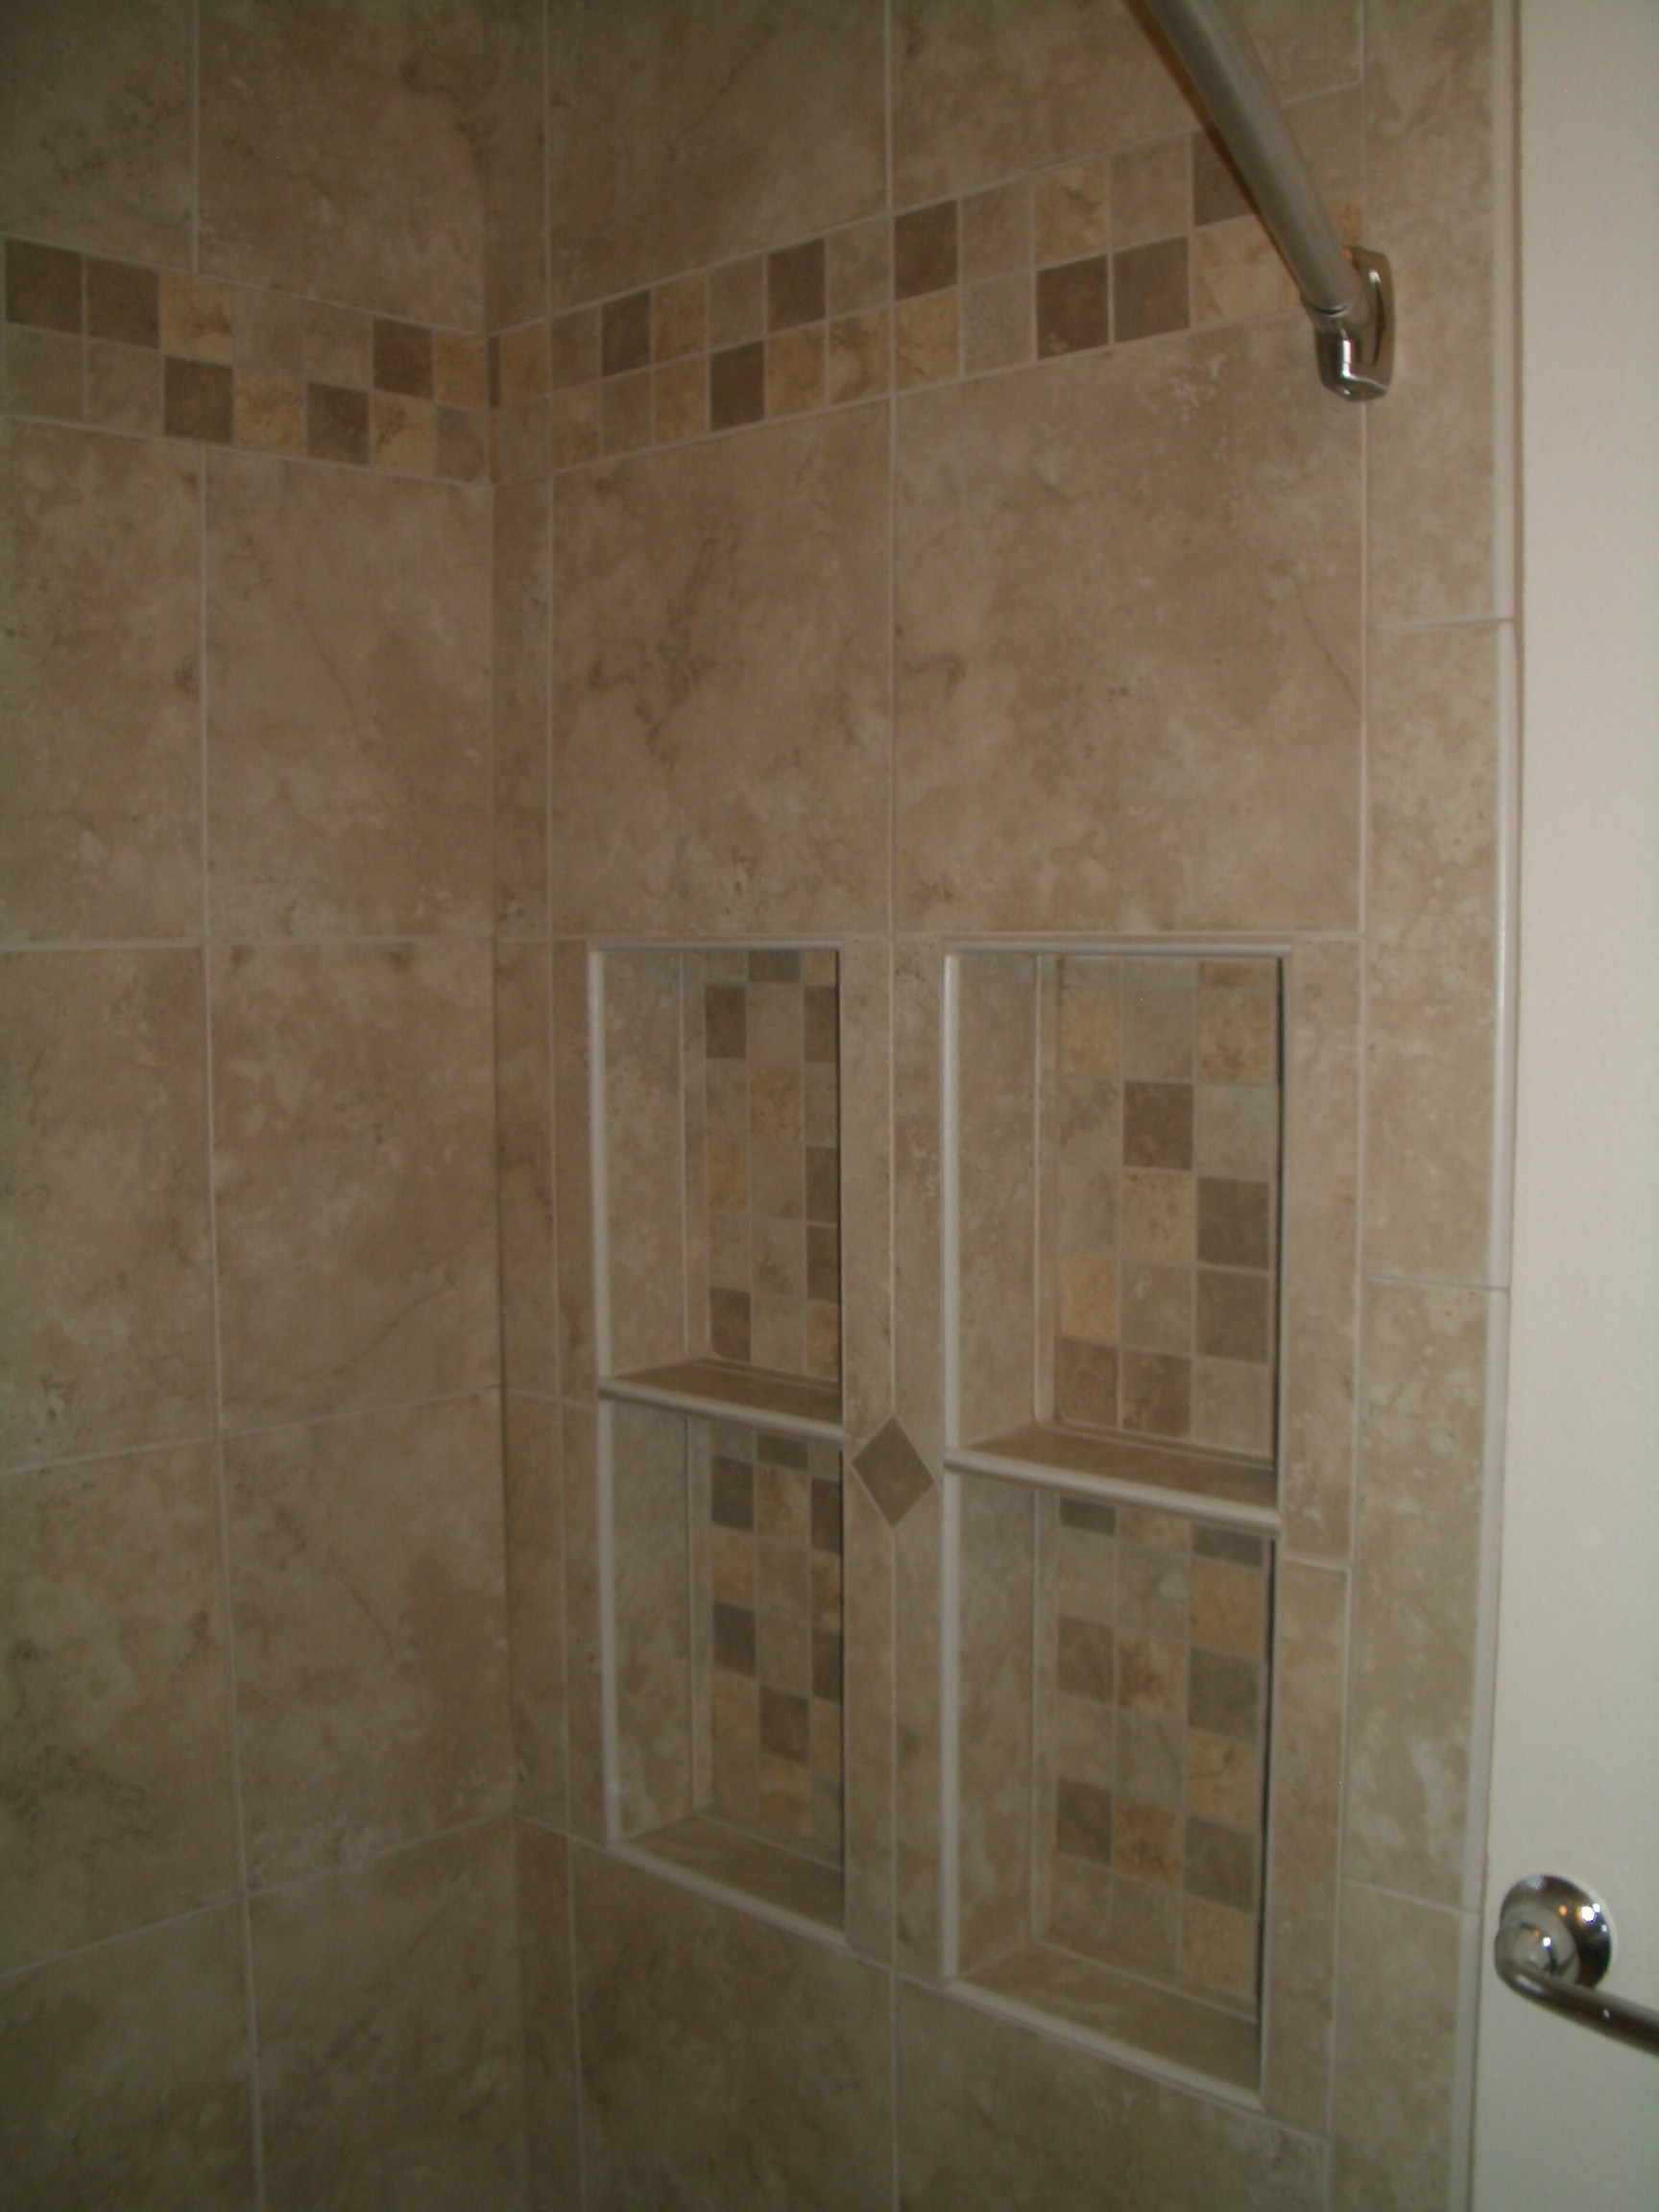 Drywall To Backerboard Transition In Tiled Showers with size 1728 X 2304